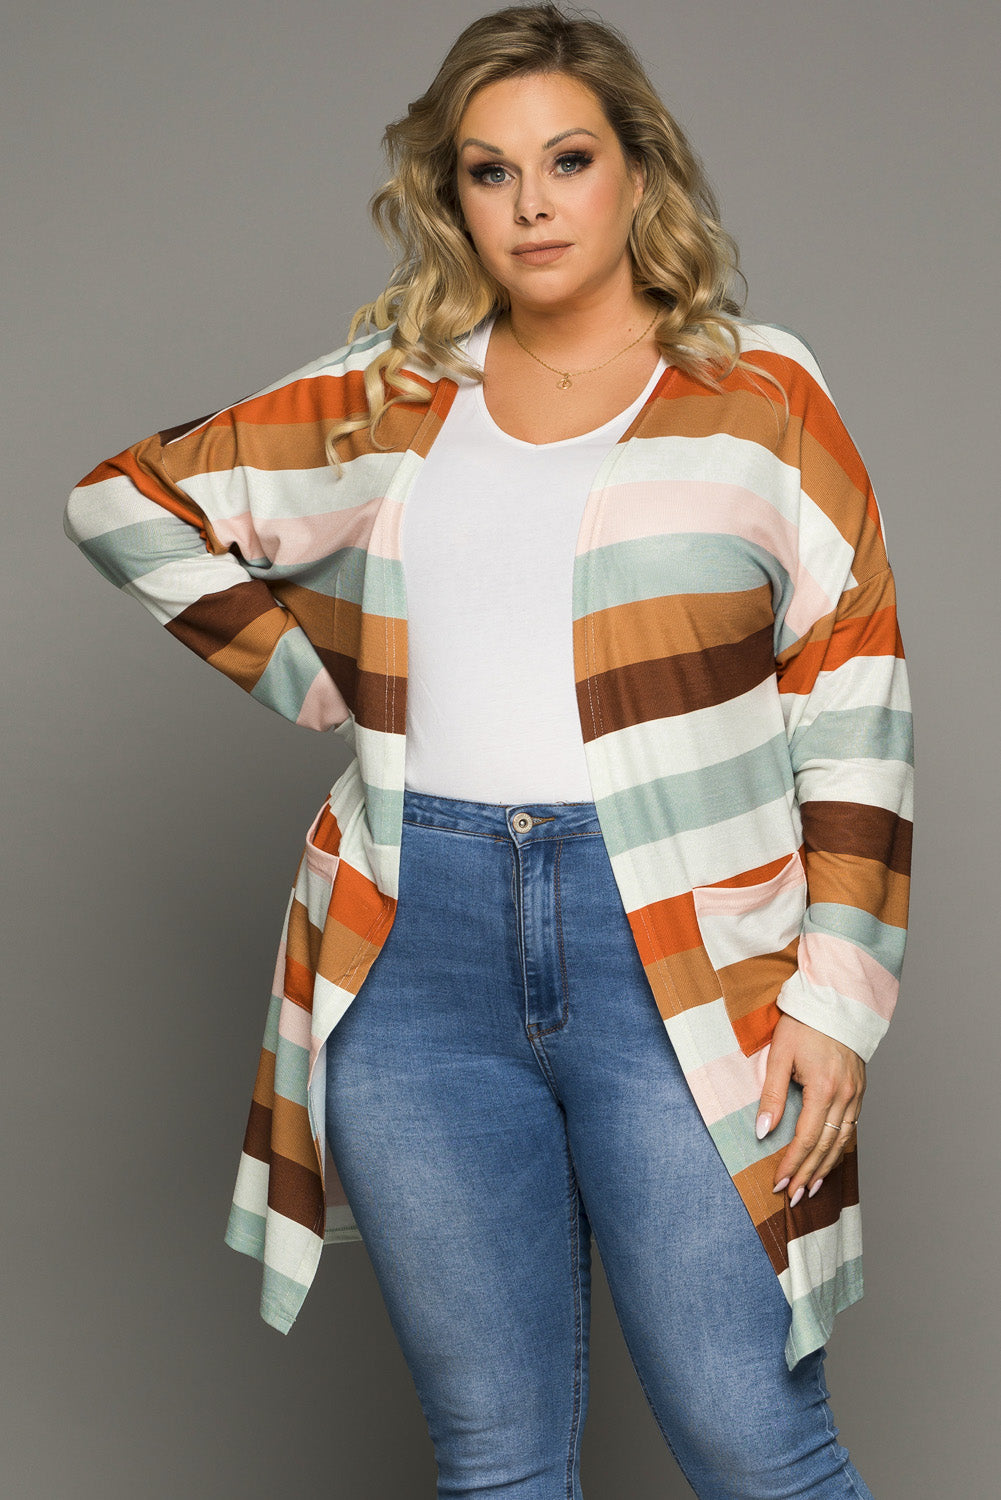 Brown Stripe Print Open Front Plus Size Cardigan With Pocket